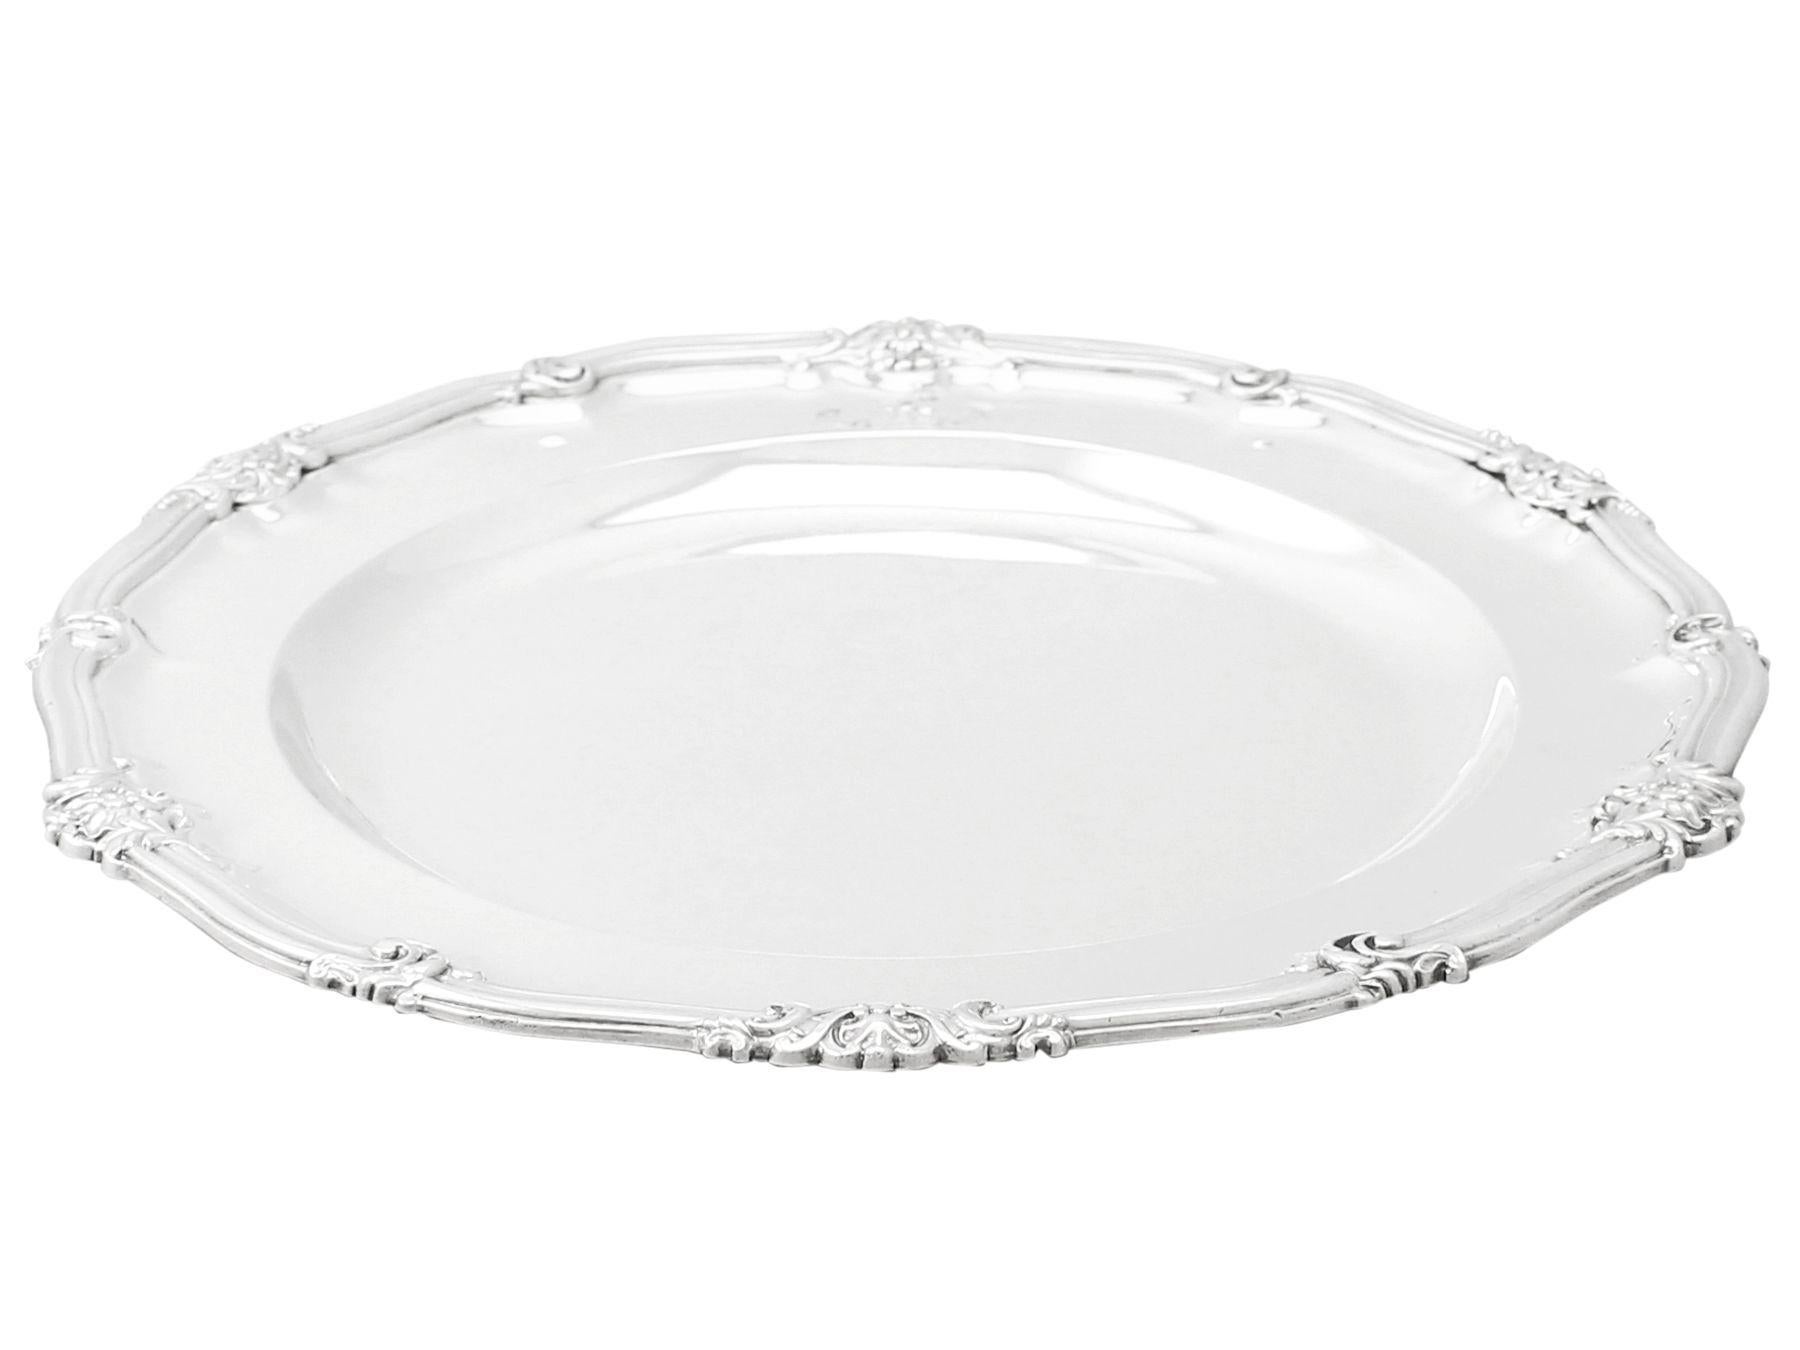 An exceptional, fine and impressive antique Victorian English sterling silver plate made by Robert Garrard II; an addition to our dining silverware collection.

This exceptional Victorian sterling silver plate has a plain circular shaped form with a